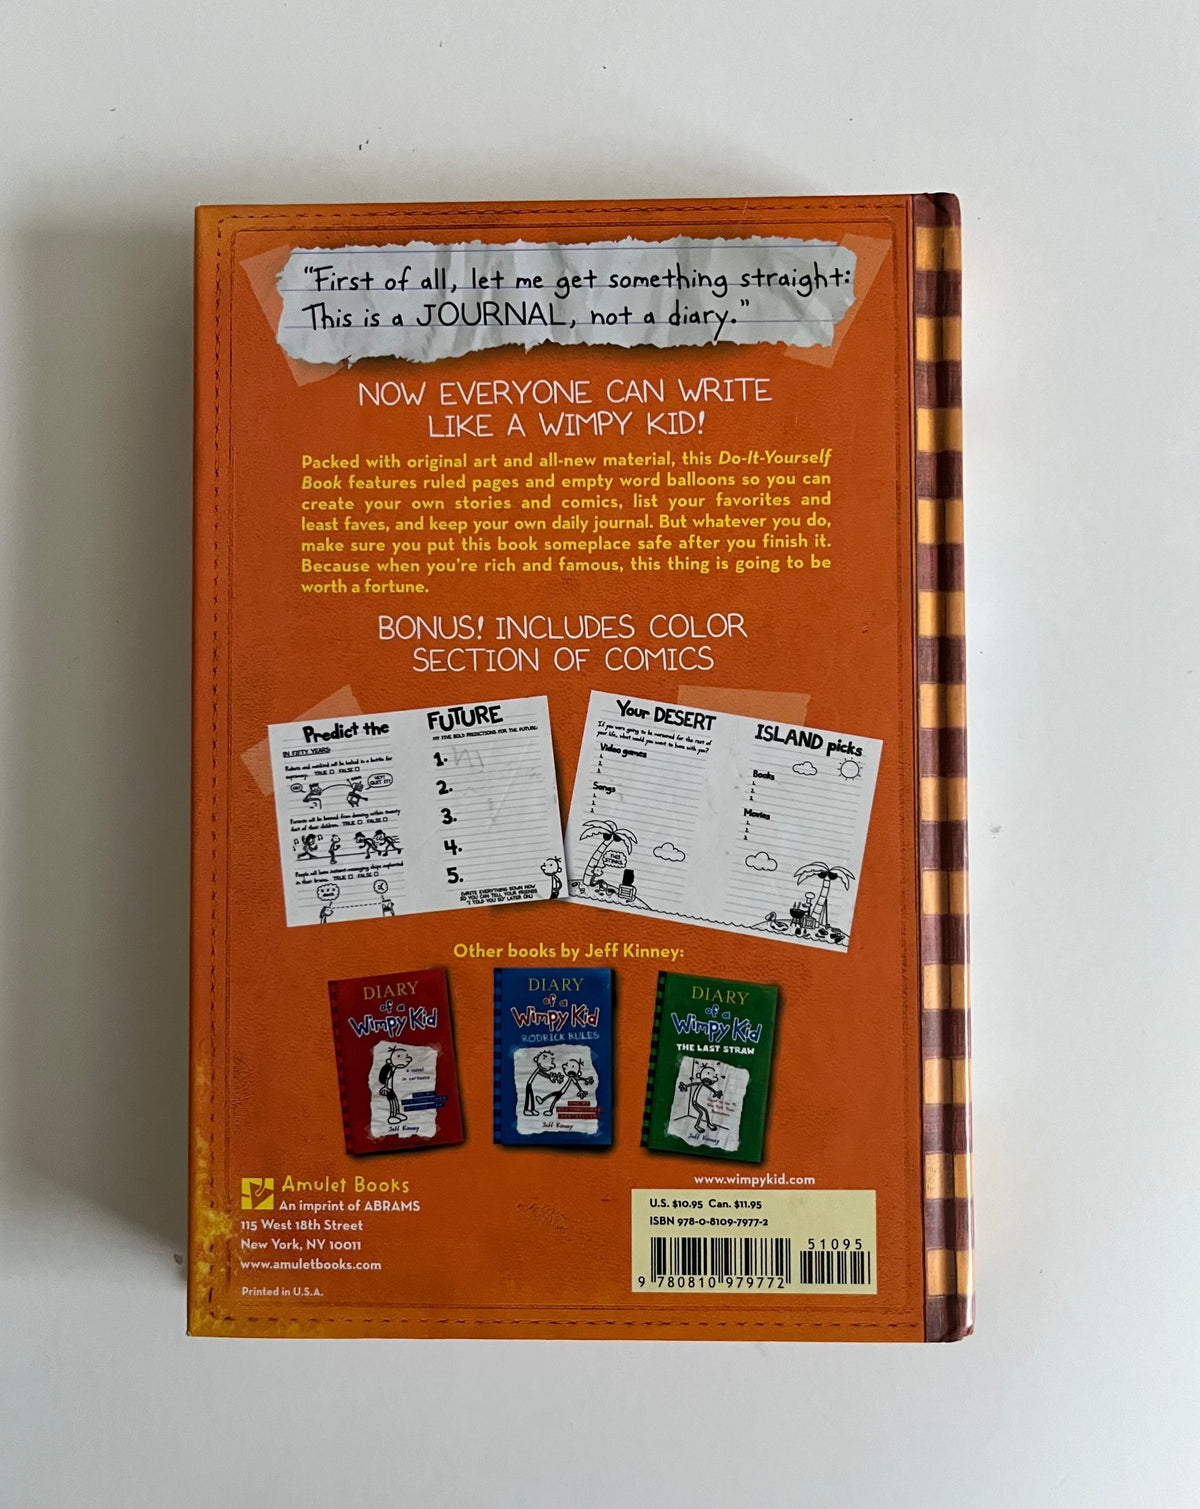 Diary of a Wimpy Kid Do-It-Yourself Book by Jeff Kinney